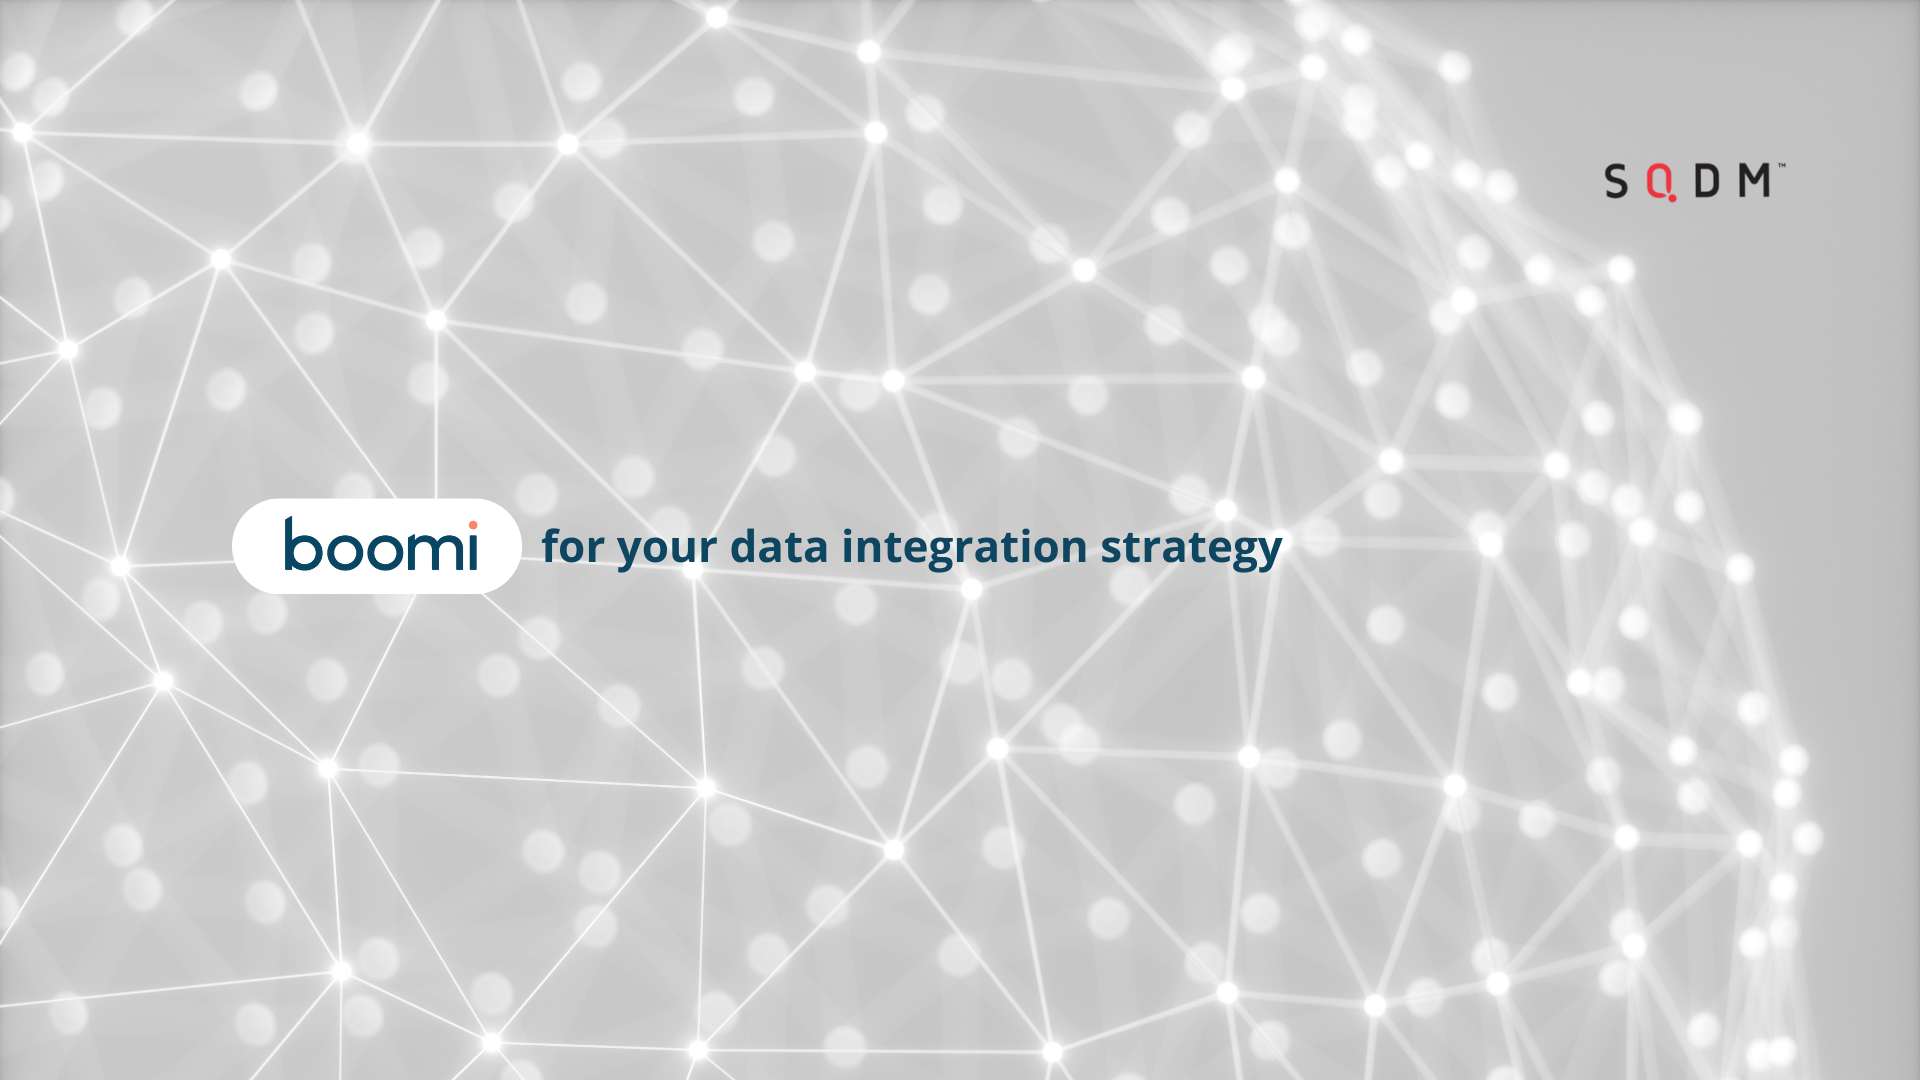 Boomi for your data integration strategy